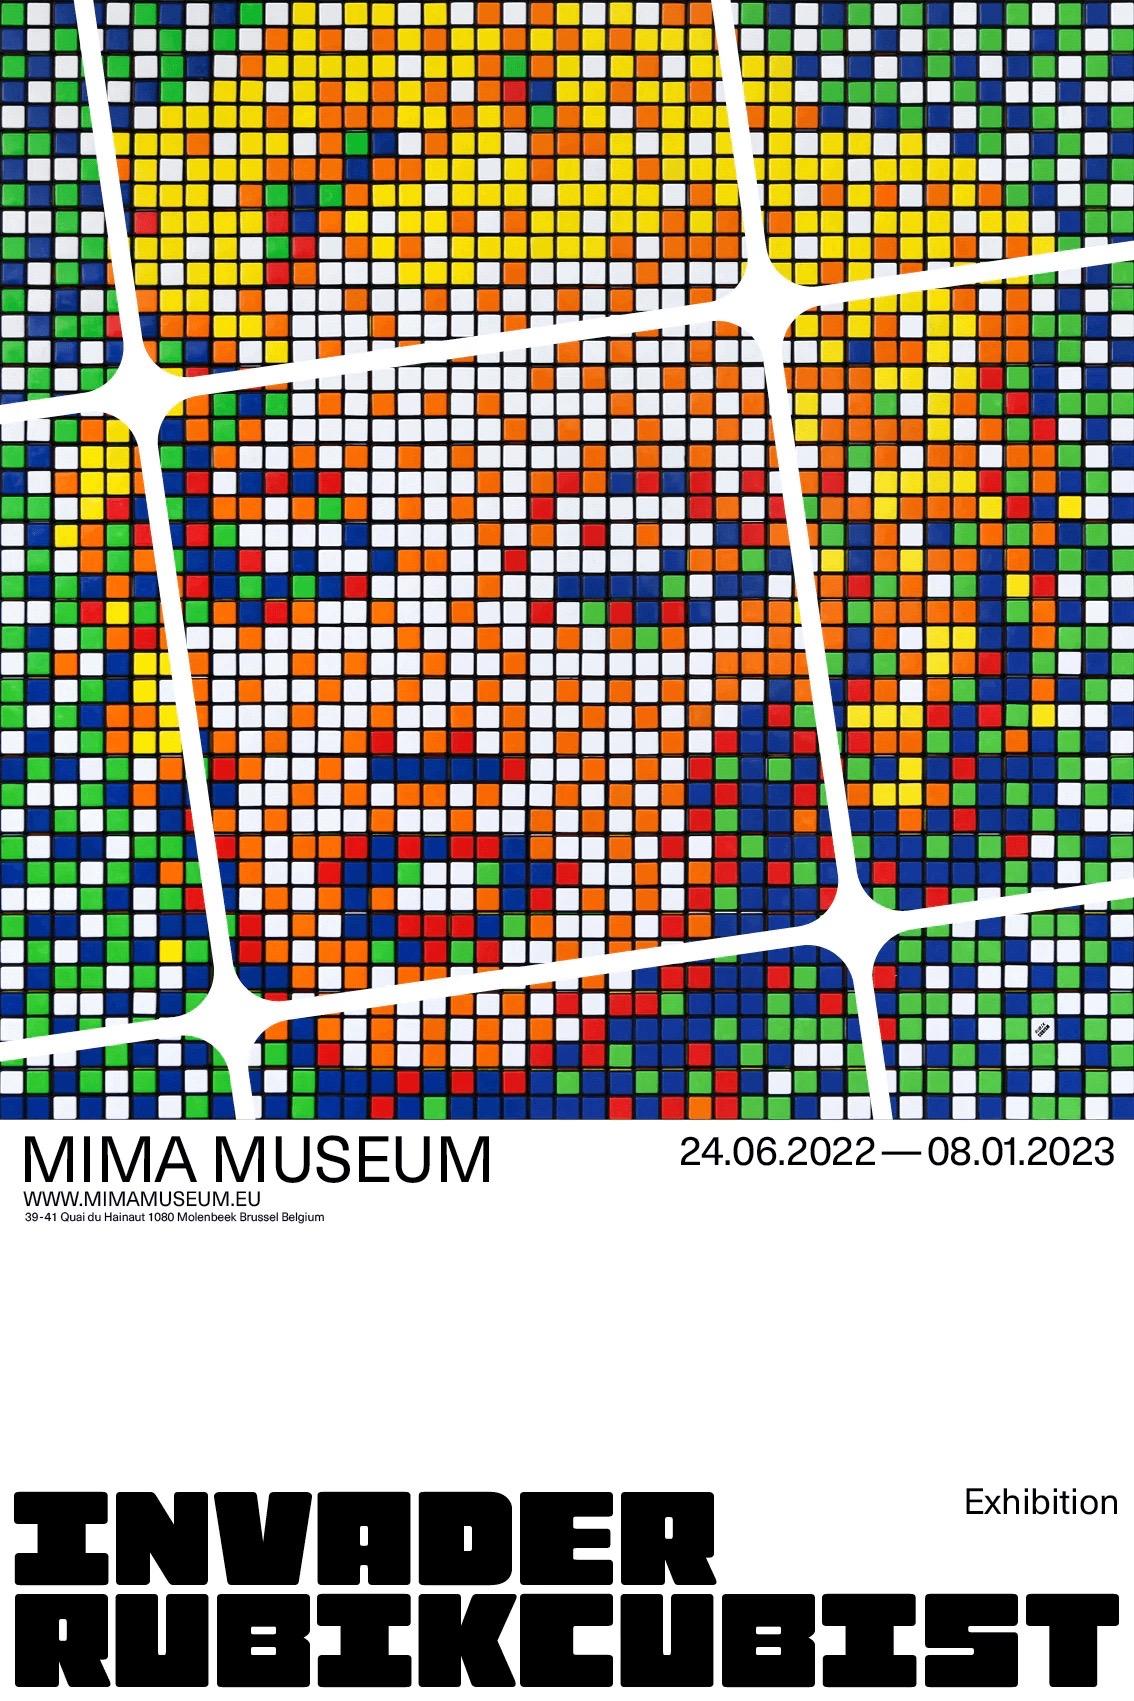 Invader, Rubikcubist MIMA Poster, 2022

﻿Offset lithograph in colour on 130gsm Arctic Volume Silk poster paper from Invader's MIMA gallery show in Brussels 

40 x 60 cm (15.7 x 23.6 in)

Open Edition